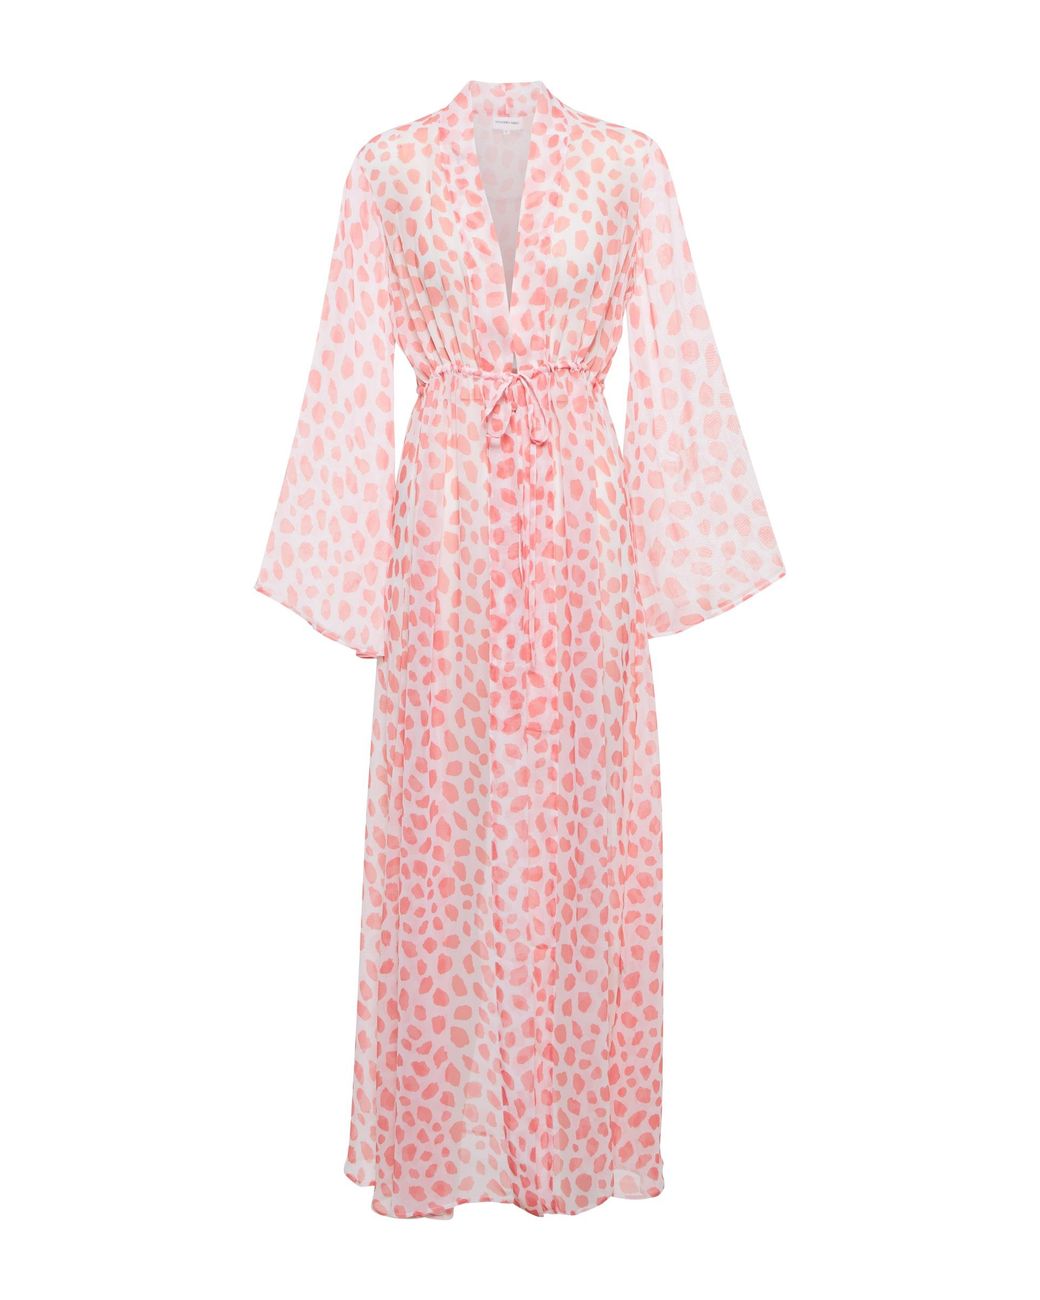 Alexandra Miro Exclusive to Betty printed beach cover-up